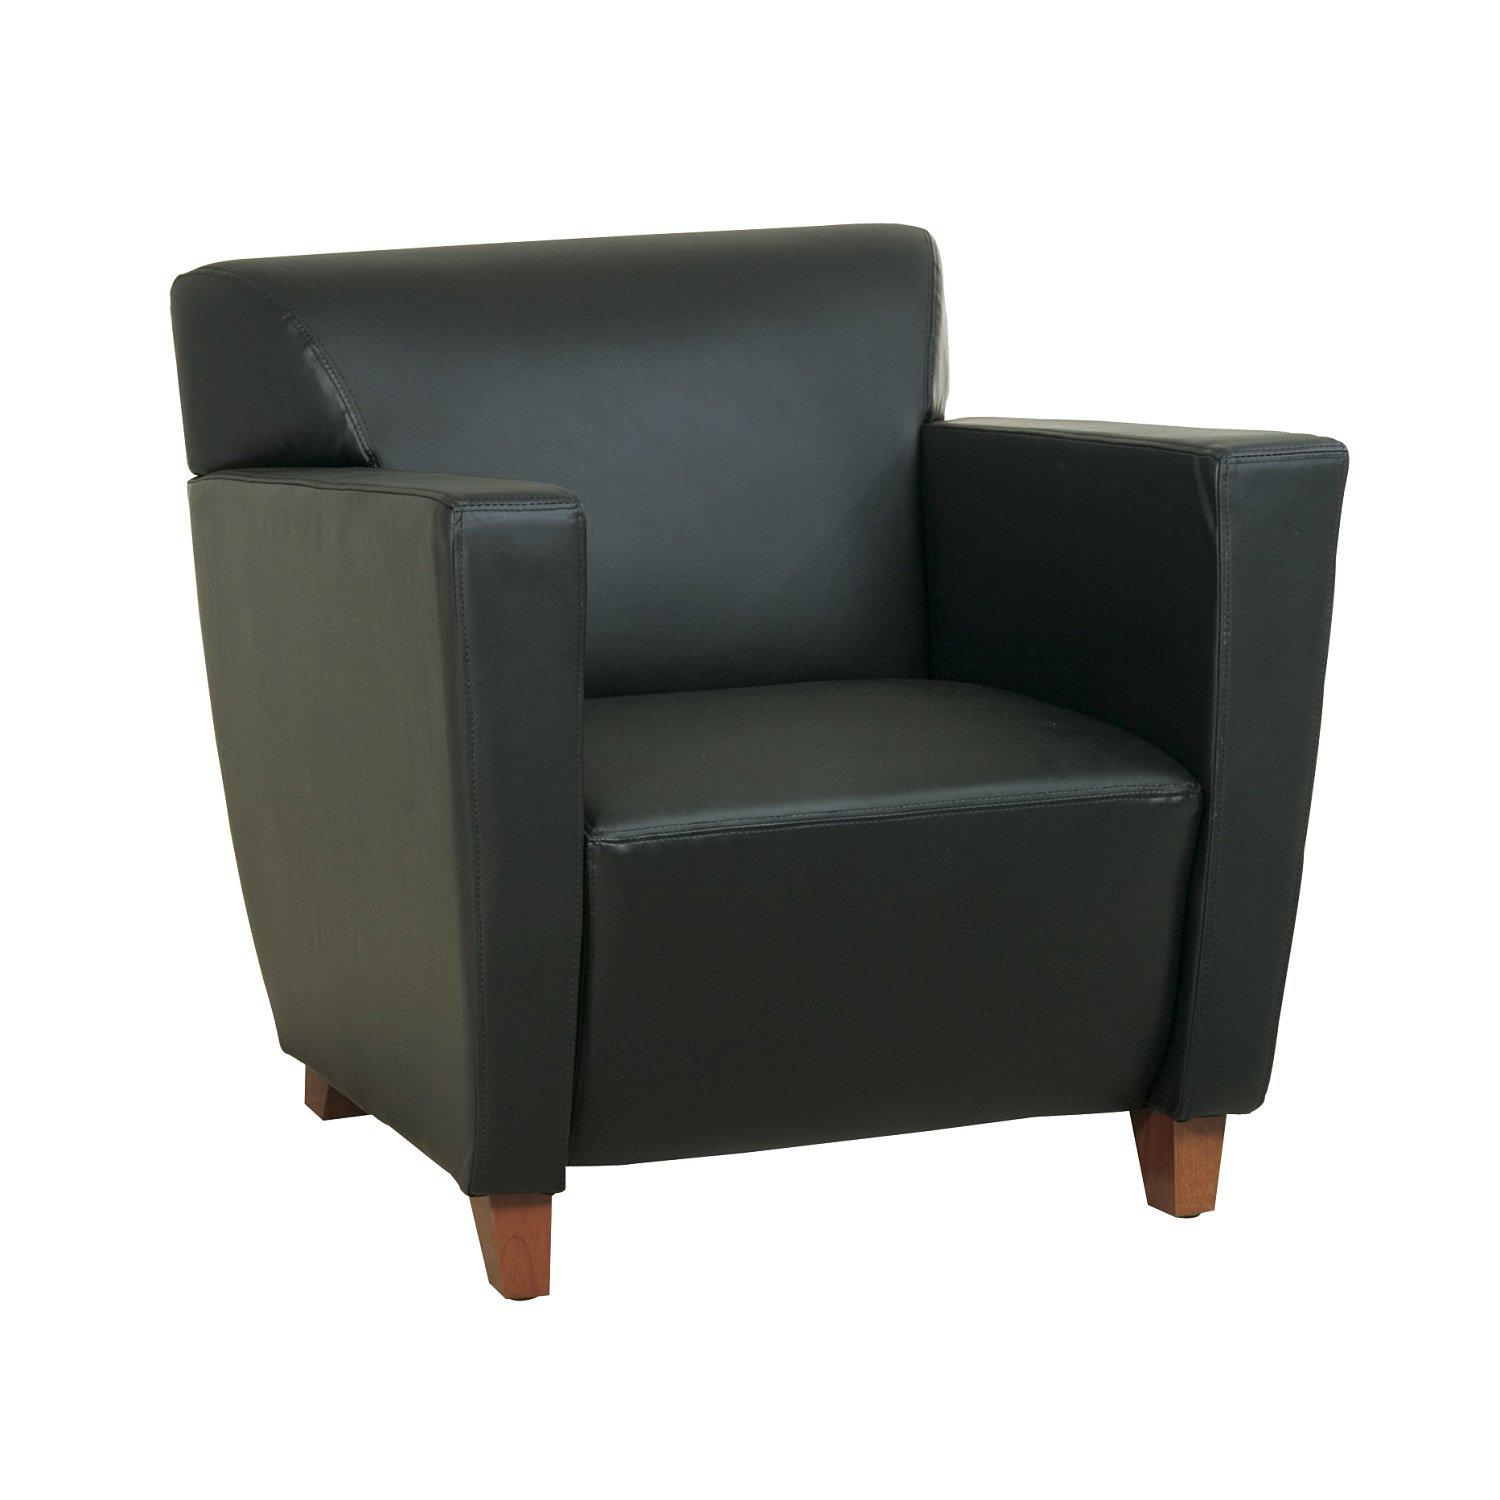 Black Bonded Leather Club Chair with Cherry Finish Legs